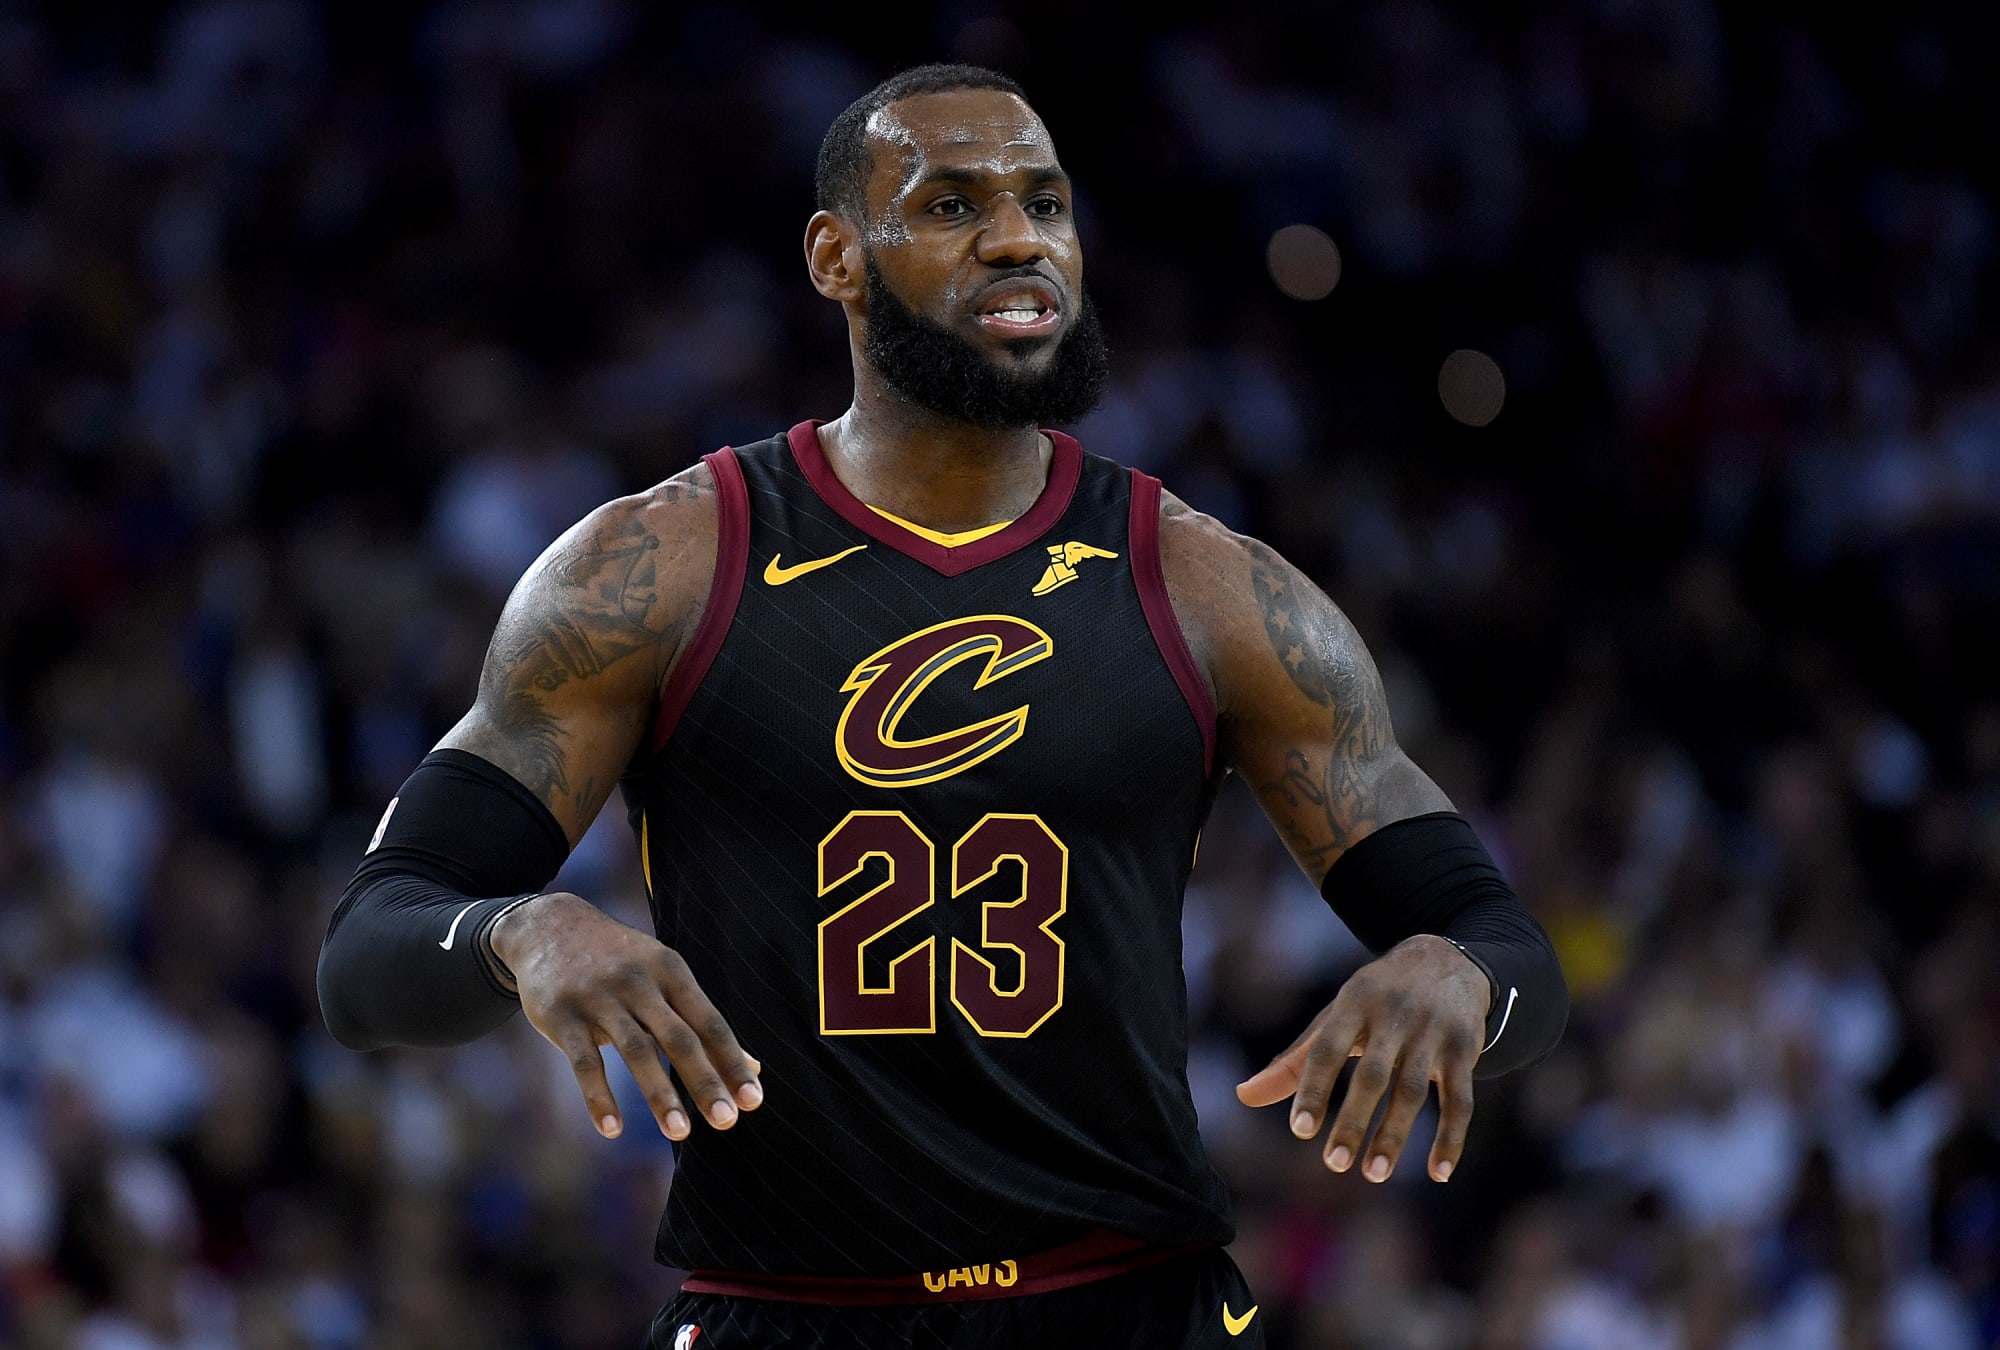 The Cleveland Cavaliers should rest LeBron against the Kings